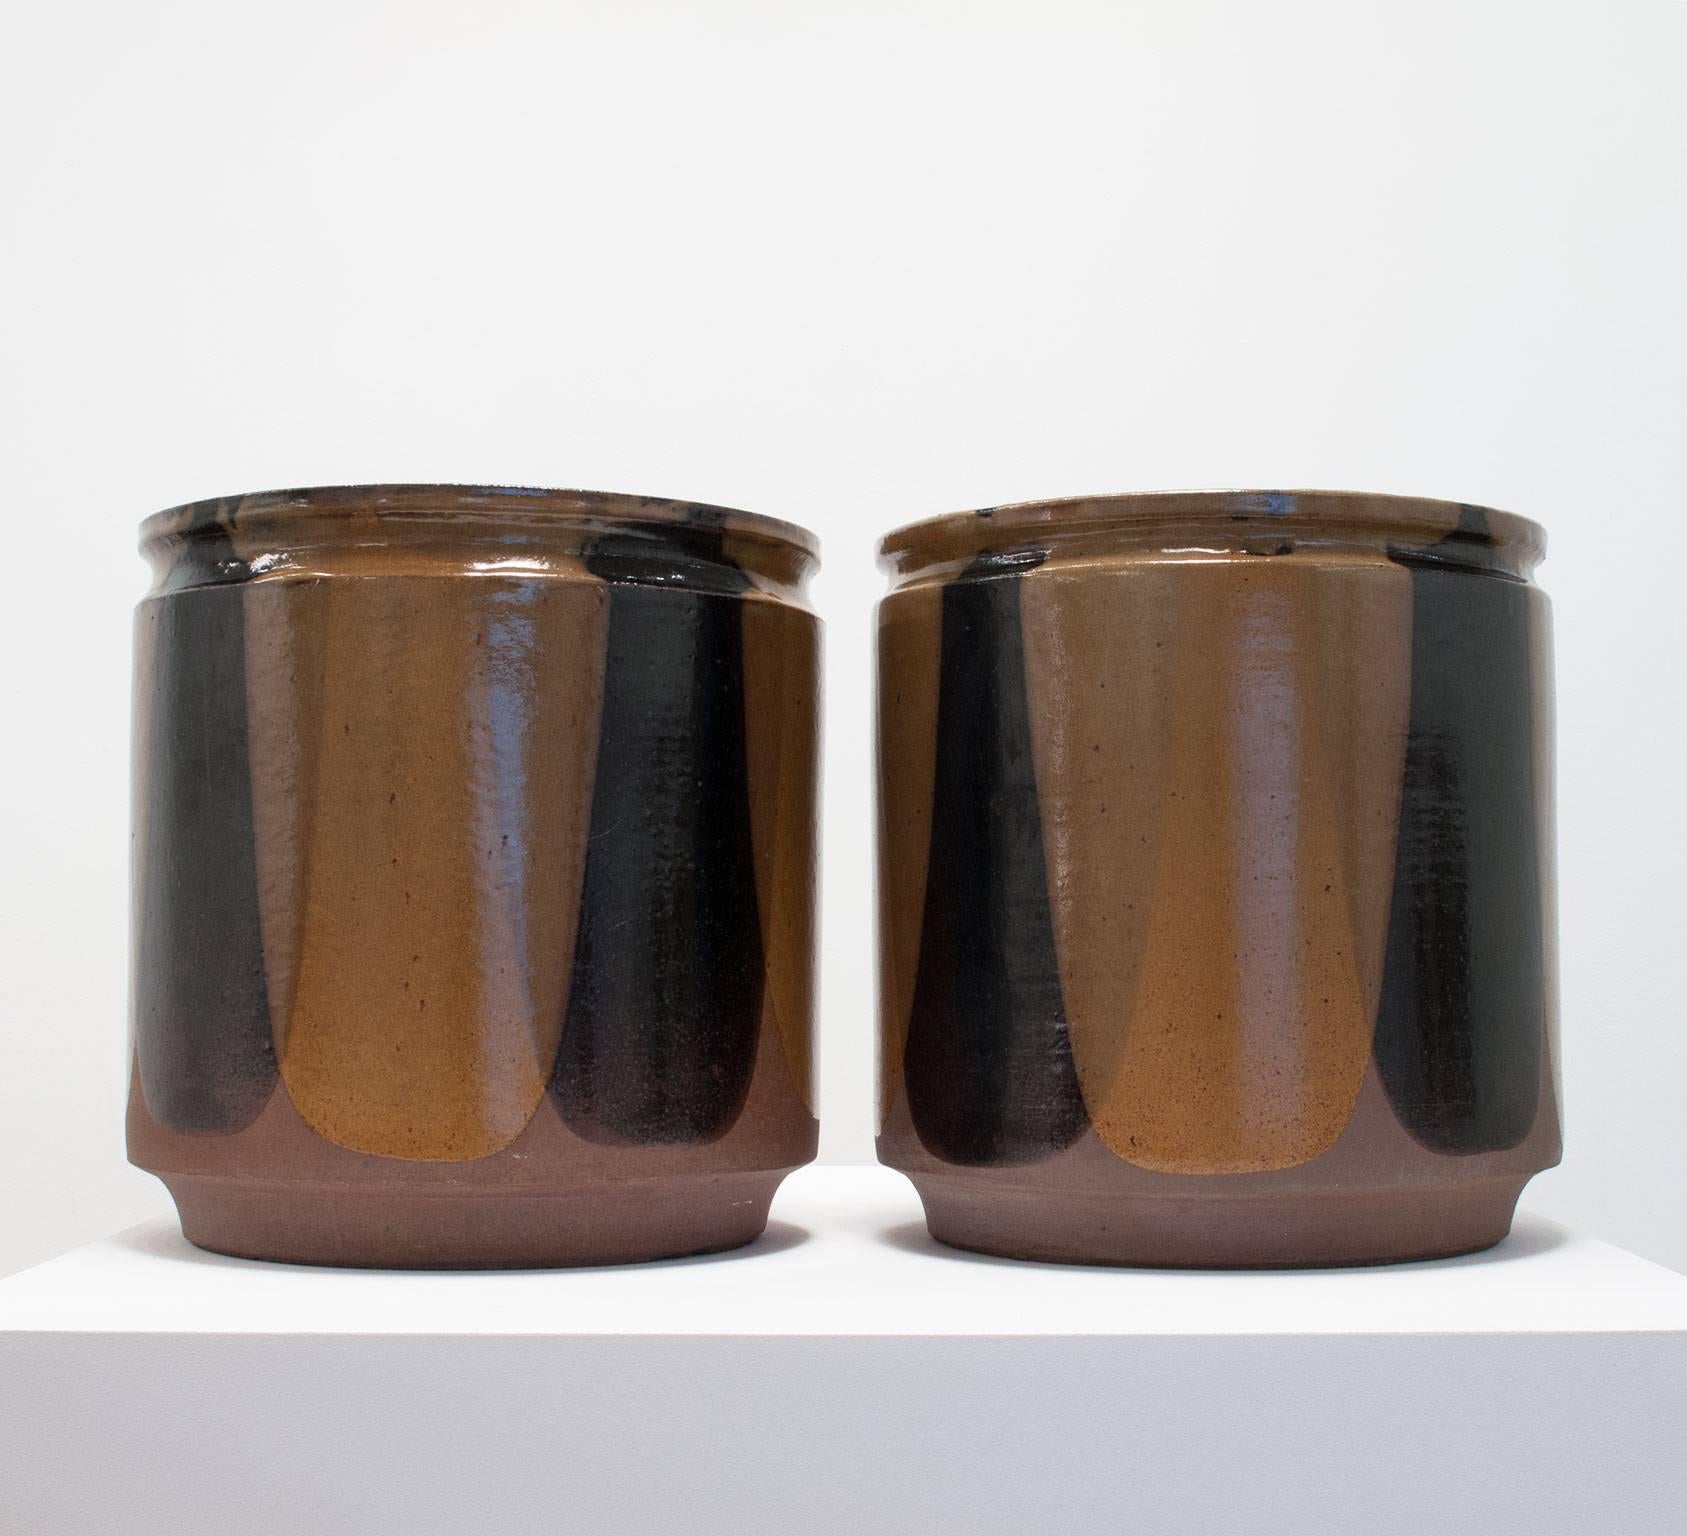 David Cressey and Robert Maxwell 'flame' design ceramic vessels, stoneware, glazed black and golden ochre, 1970s, Earthgender Ceramics, Los Angeles, California, 15.25 high x 15 diameter inches each, 31 pounds each.